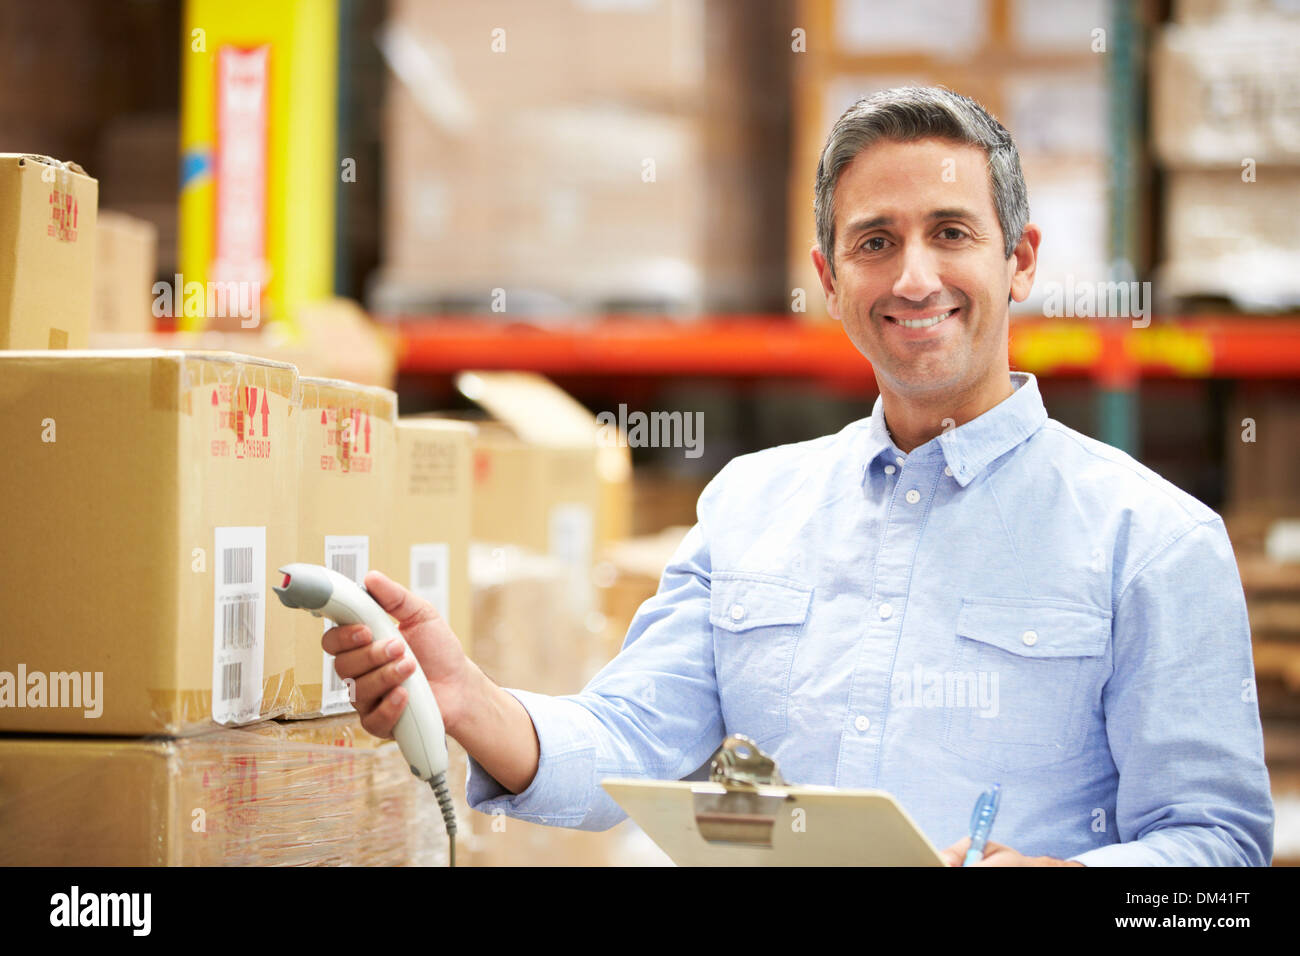 Worker Scanning Package In Warehouse Stock Photo